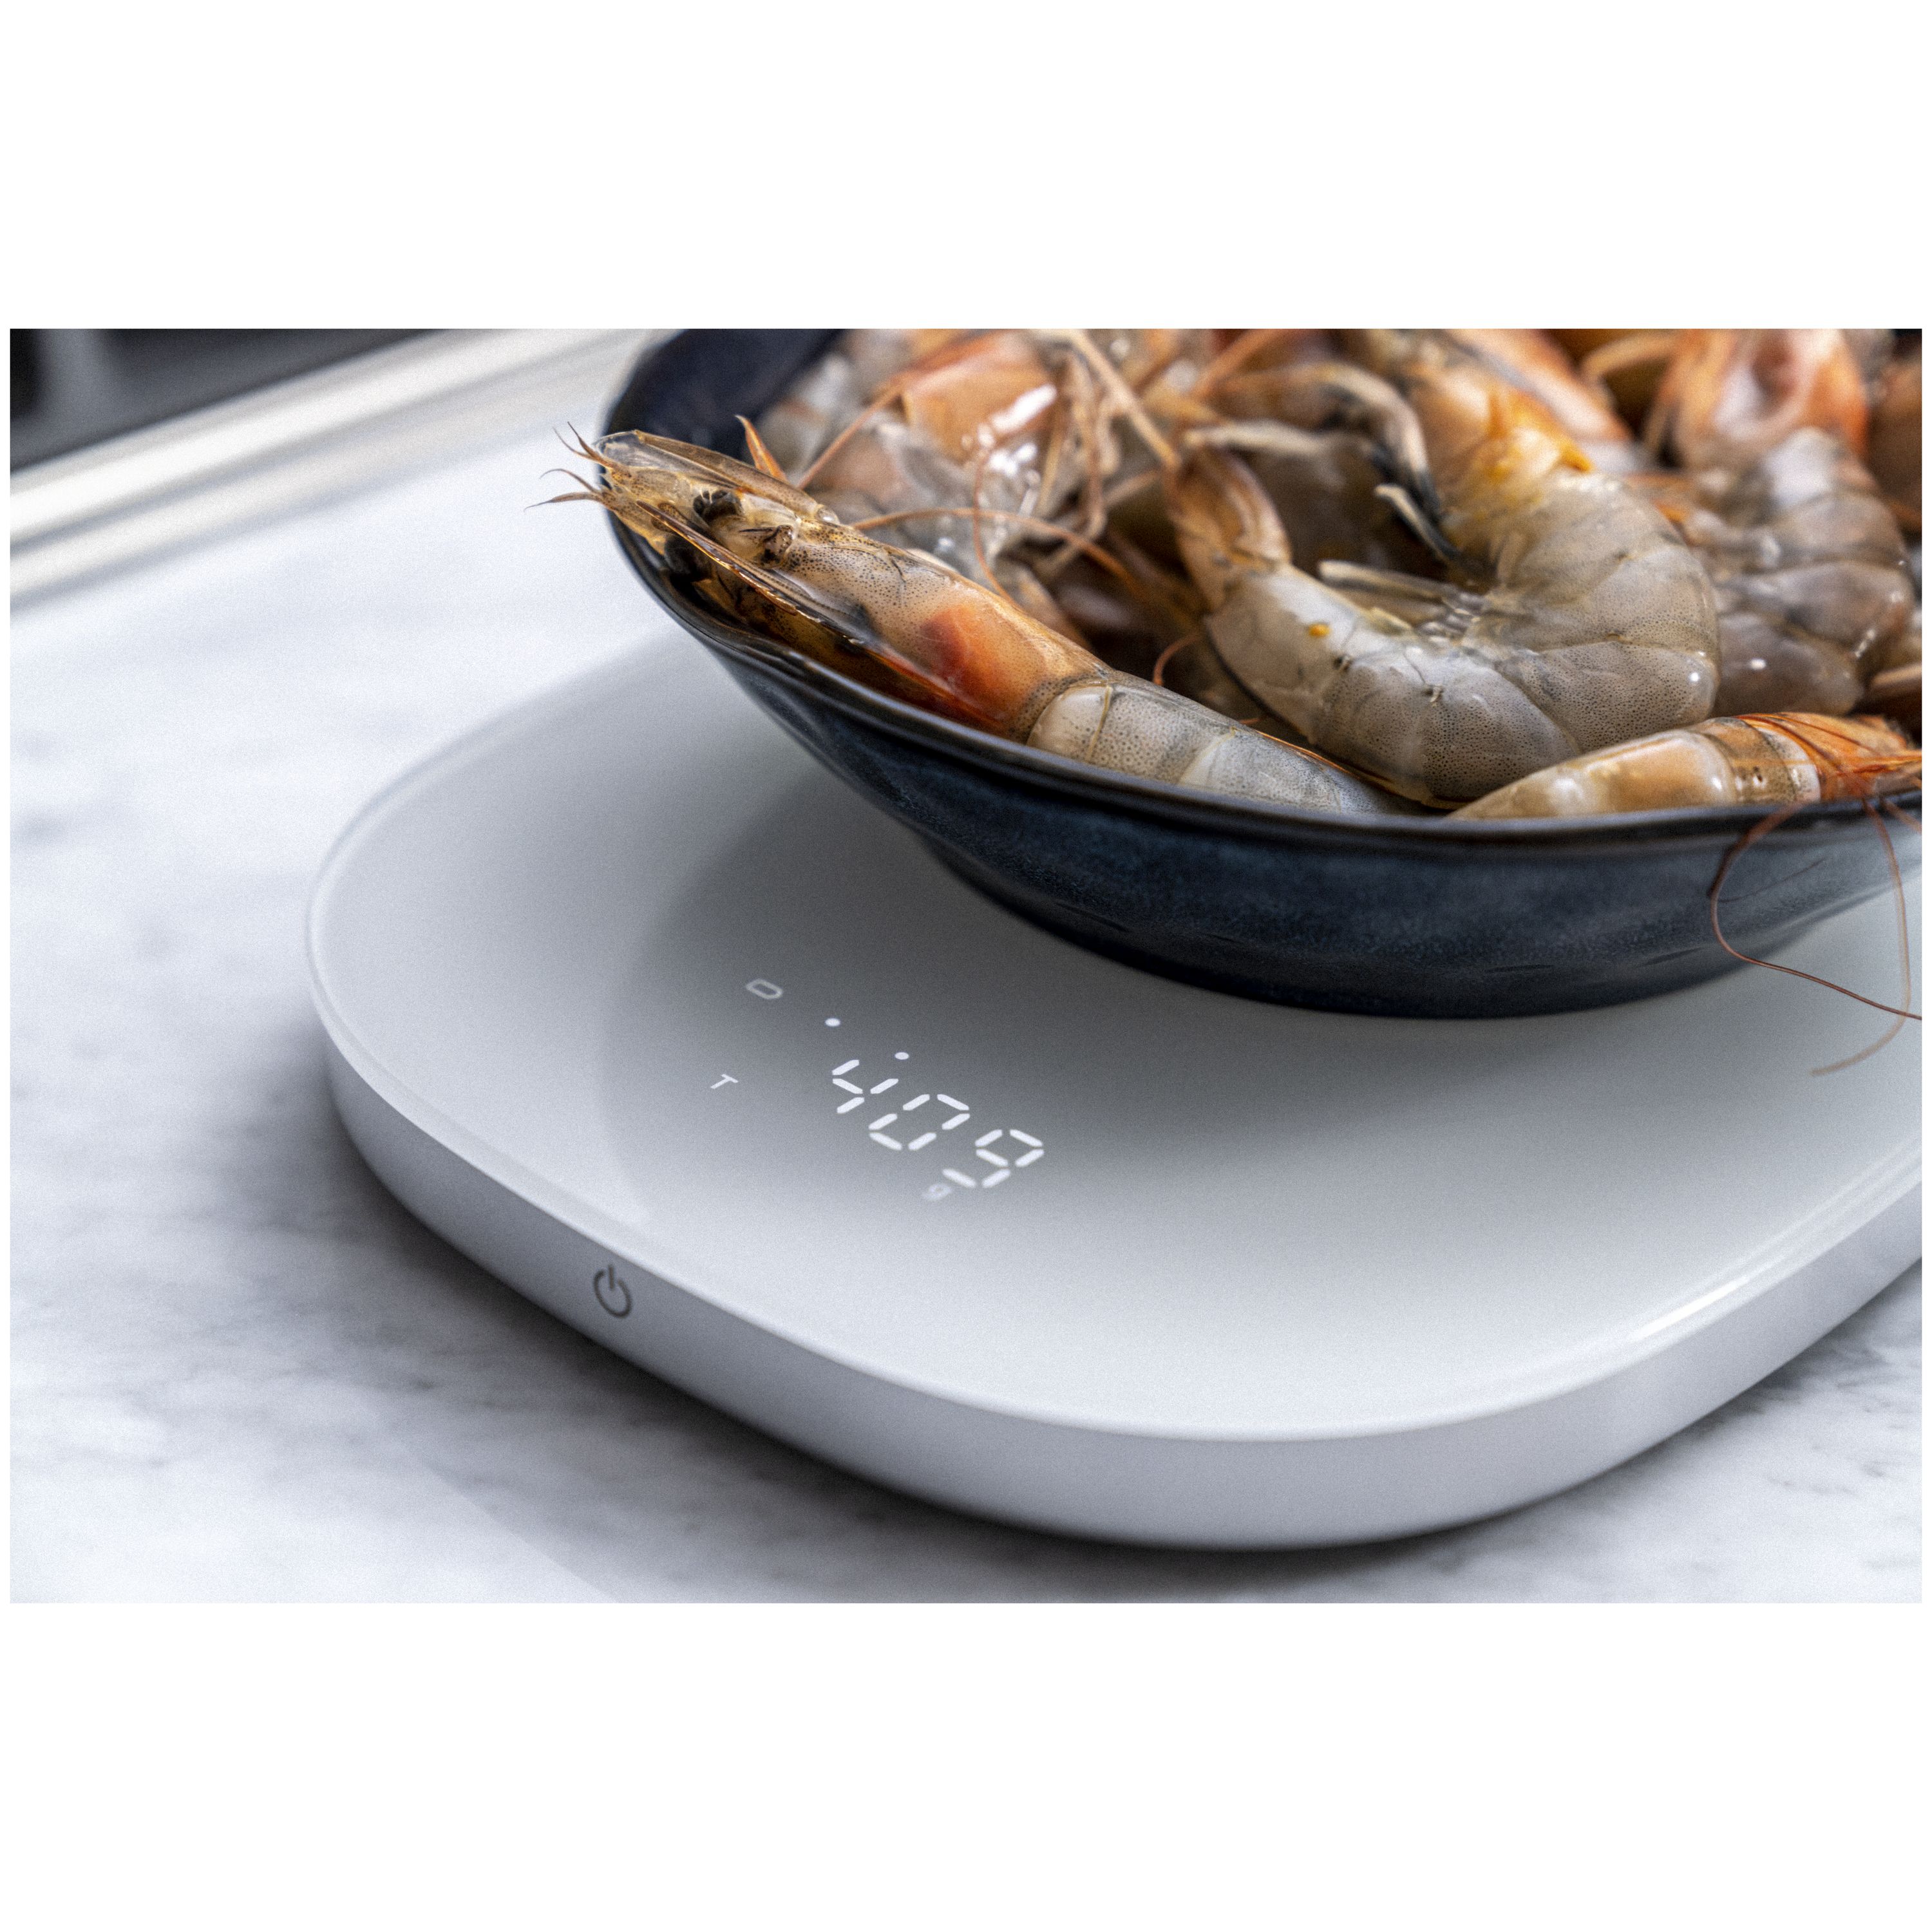 ZWILLING Enfinigy Wireless Charging Kitchen Scale - Silver